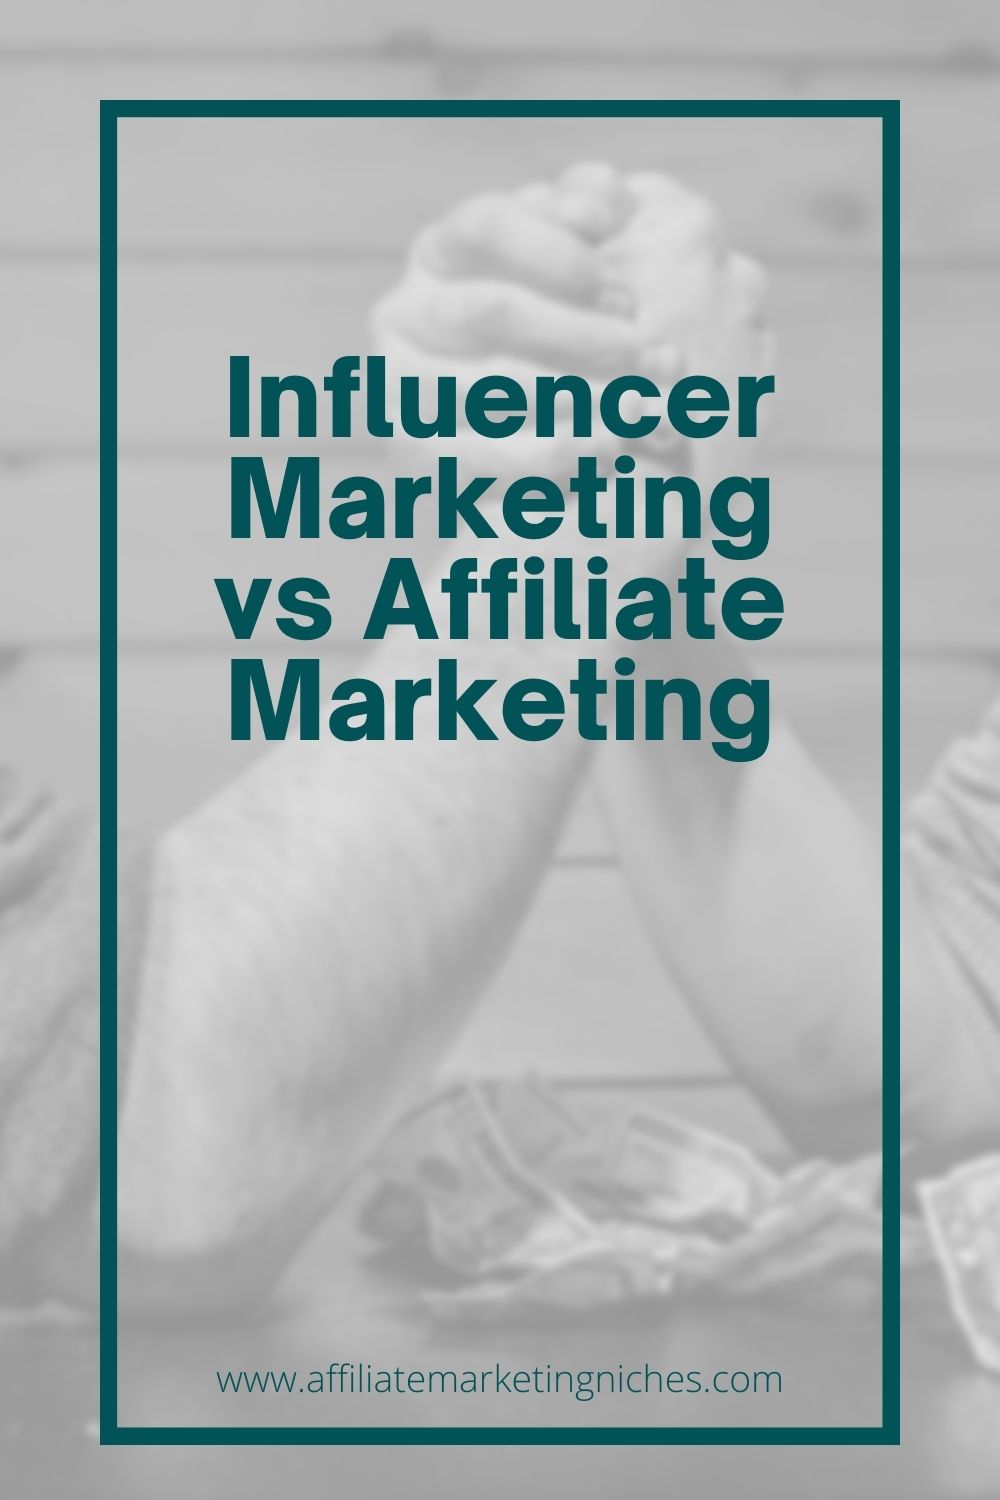 Which is better, influencer marketing or affiliate marketing?